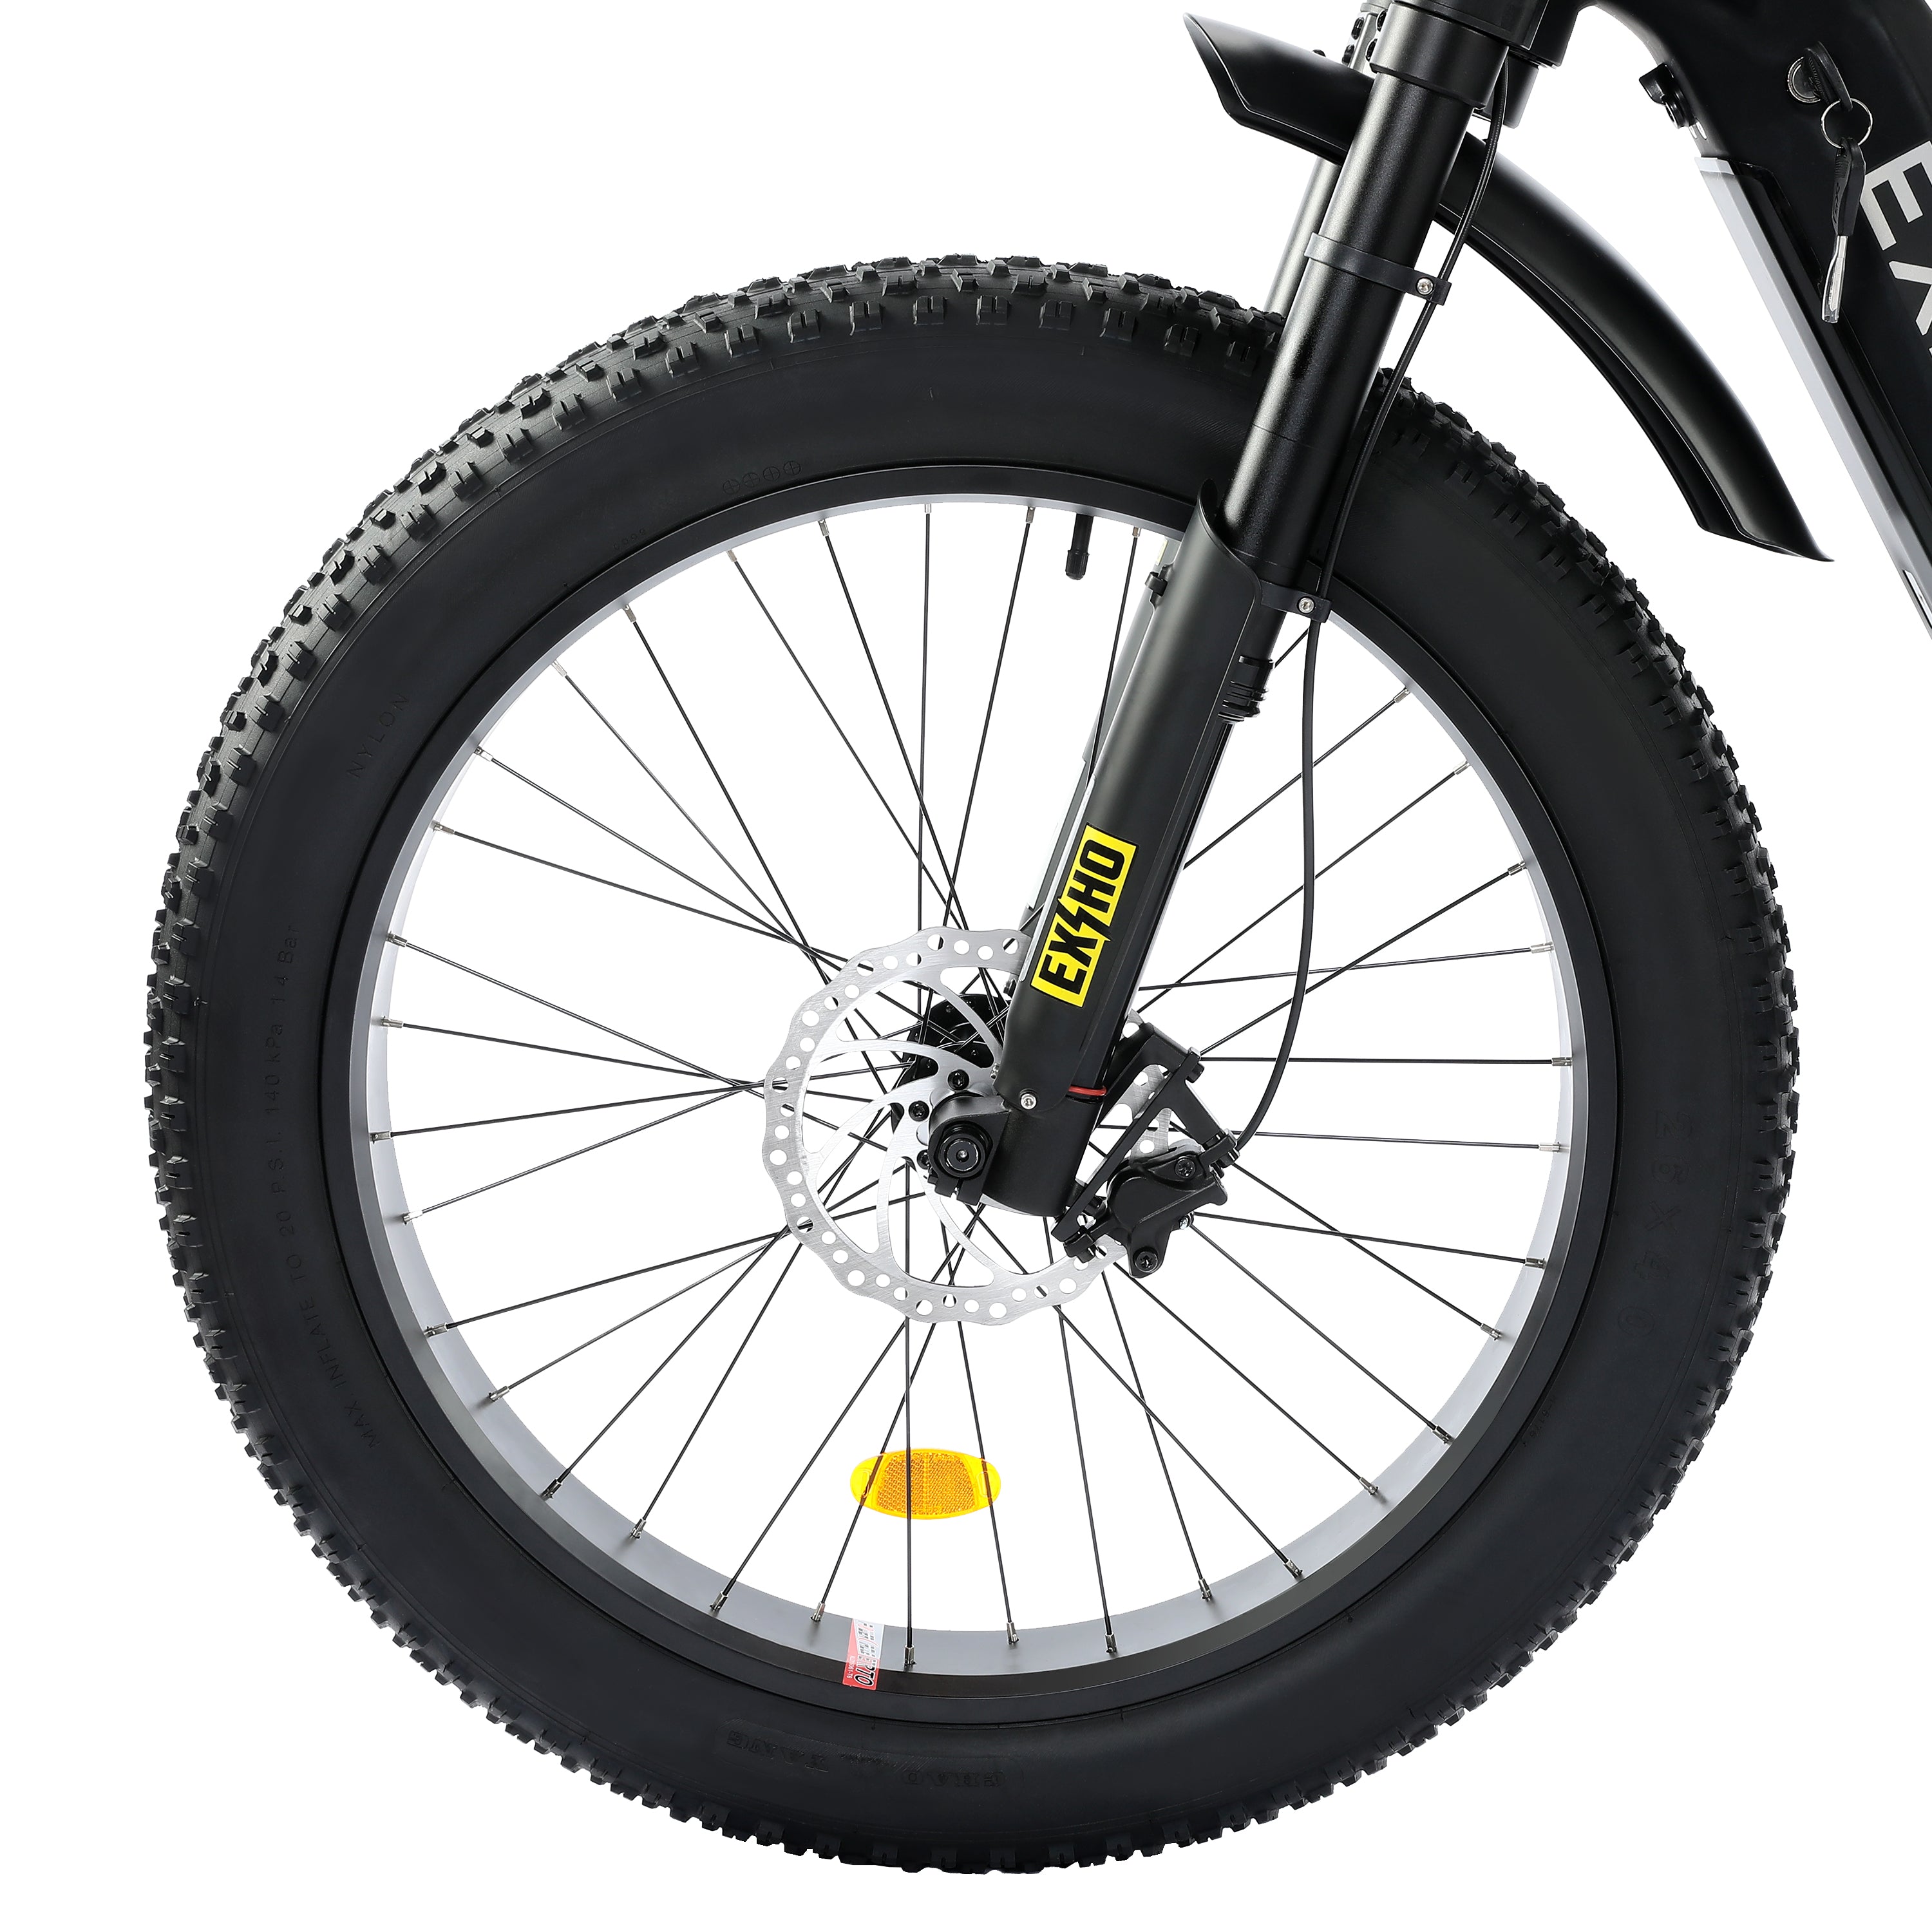 Explorer 26 inches 48V Fat Tire Electric Bike with Rear Rack - 5